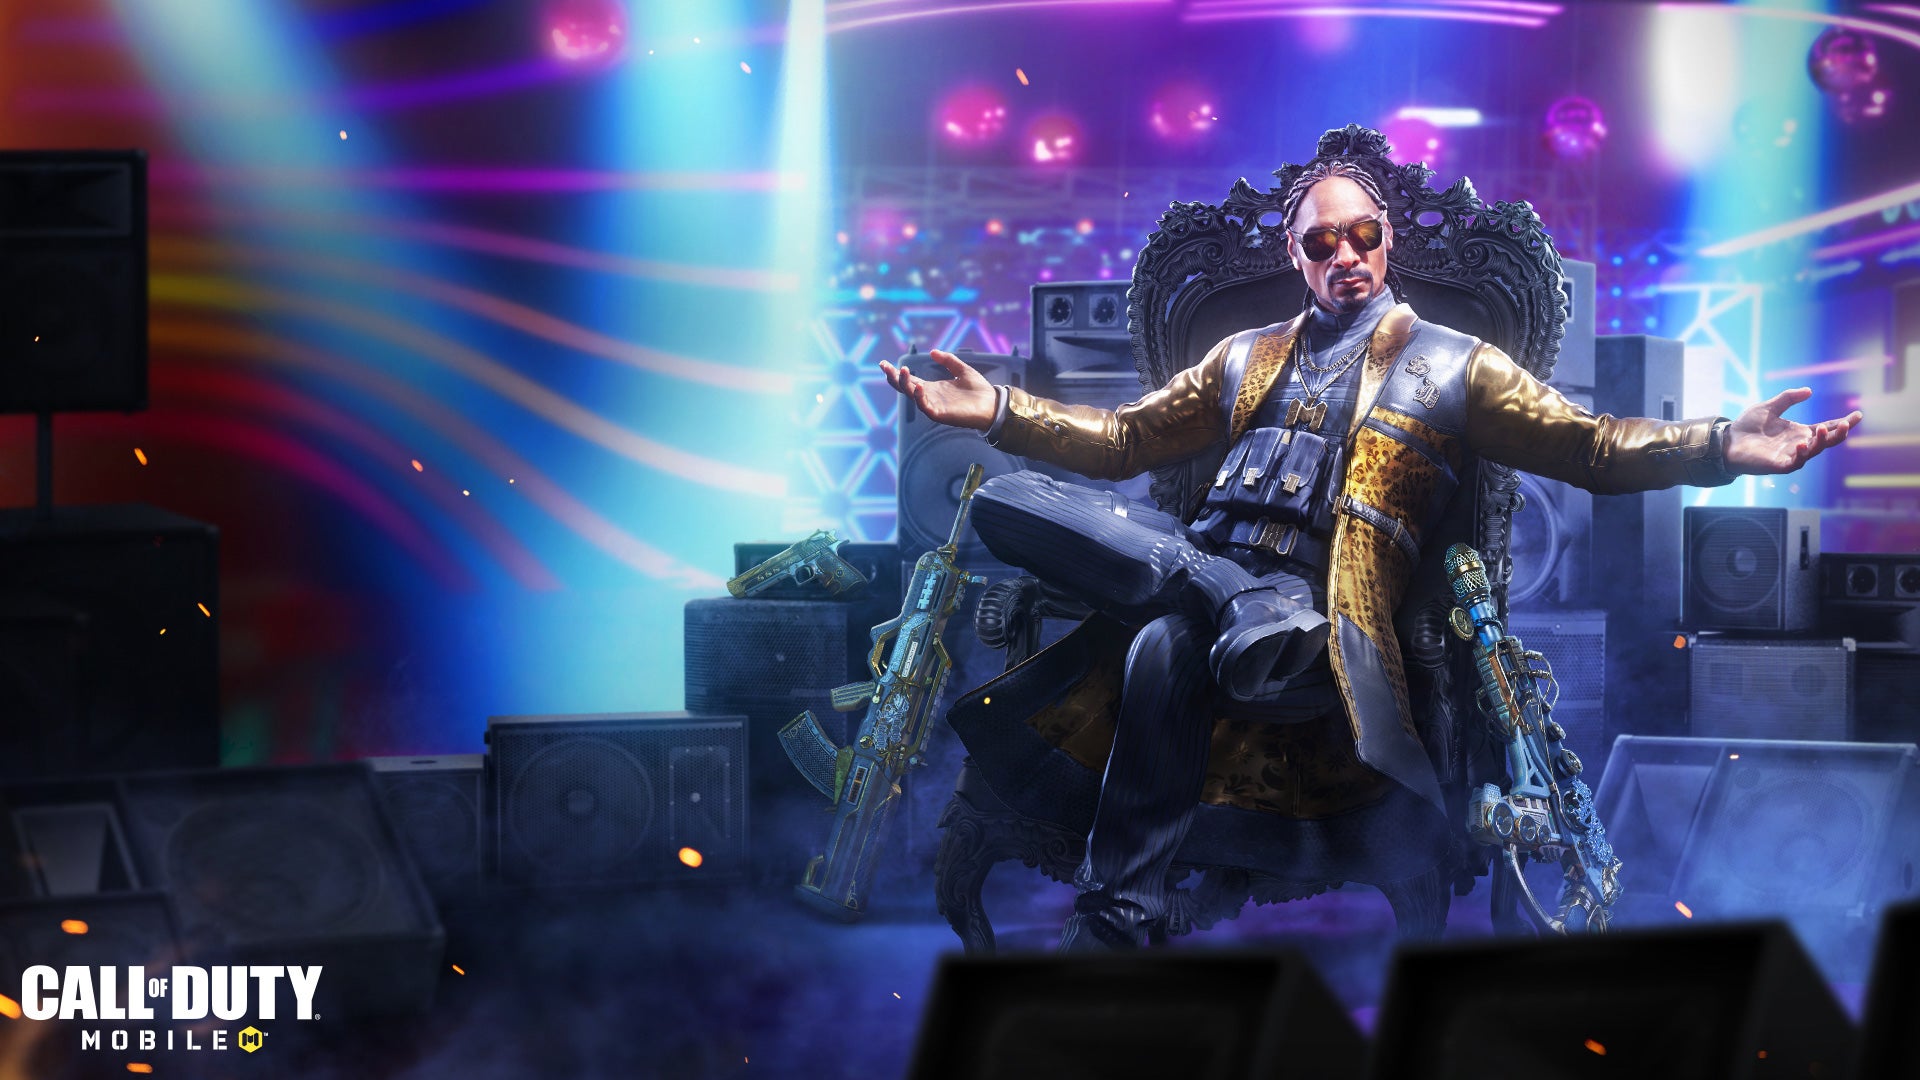 Snoop Dogg Joins Call of Duty: Warzone, Vanguard, and Mobile as a Playable Operator